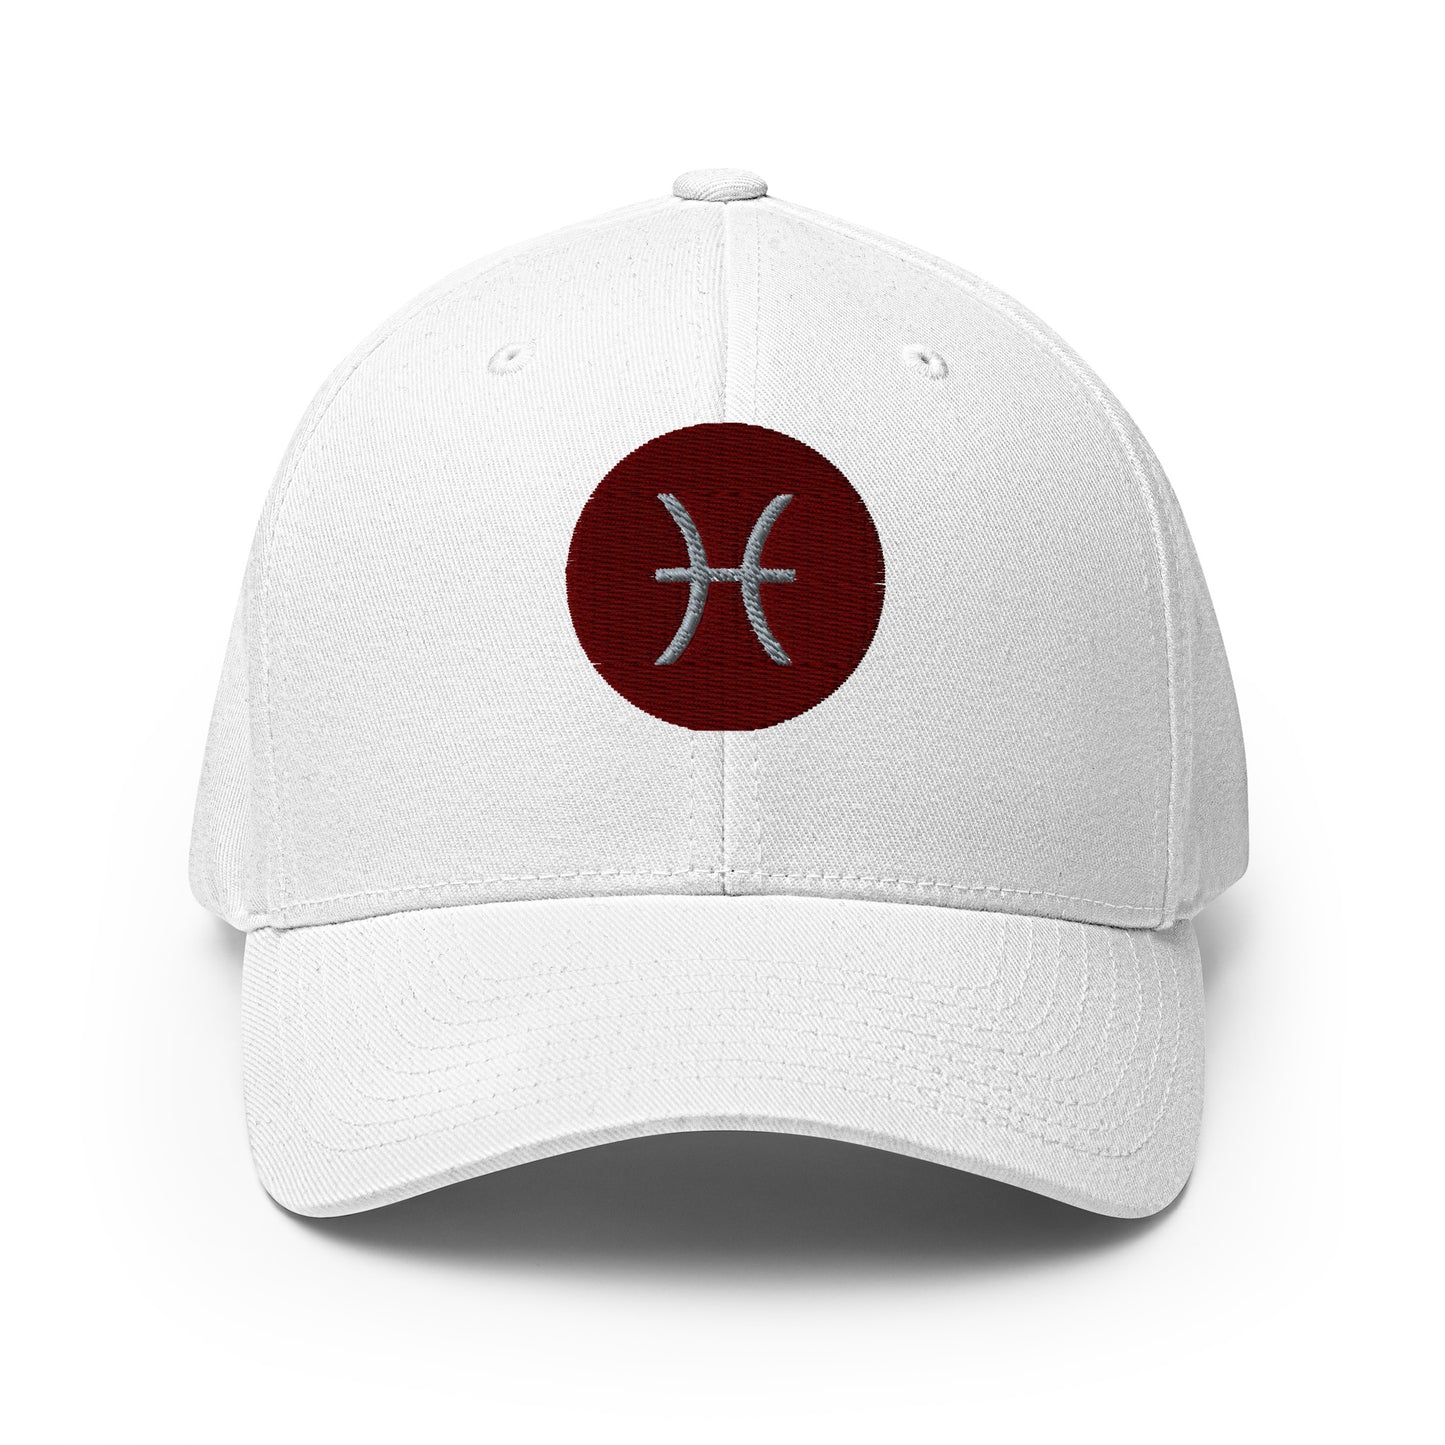 Baseball Cap with Pisces Symbol